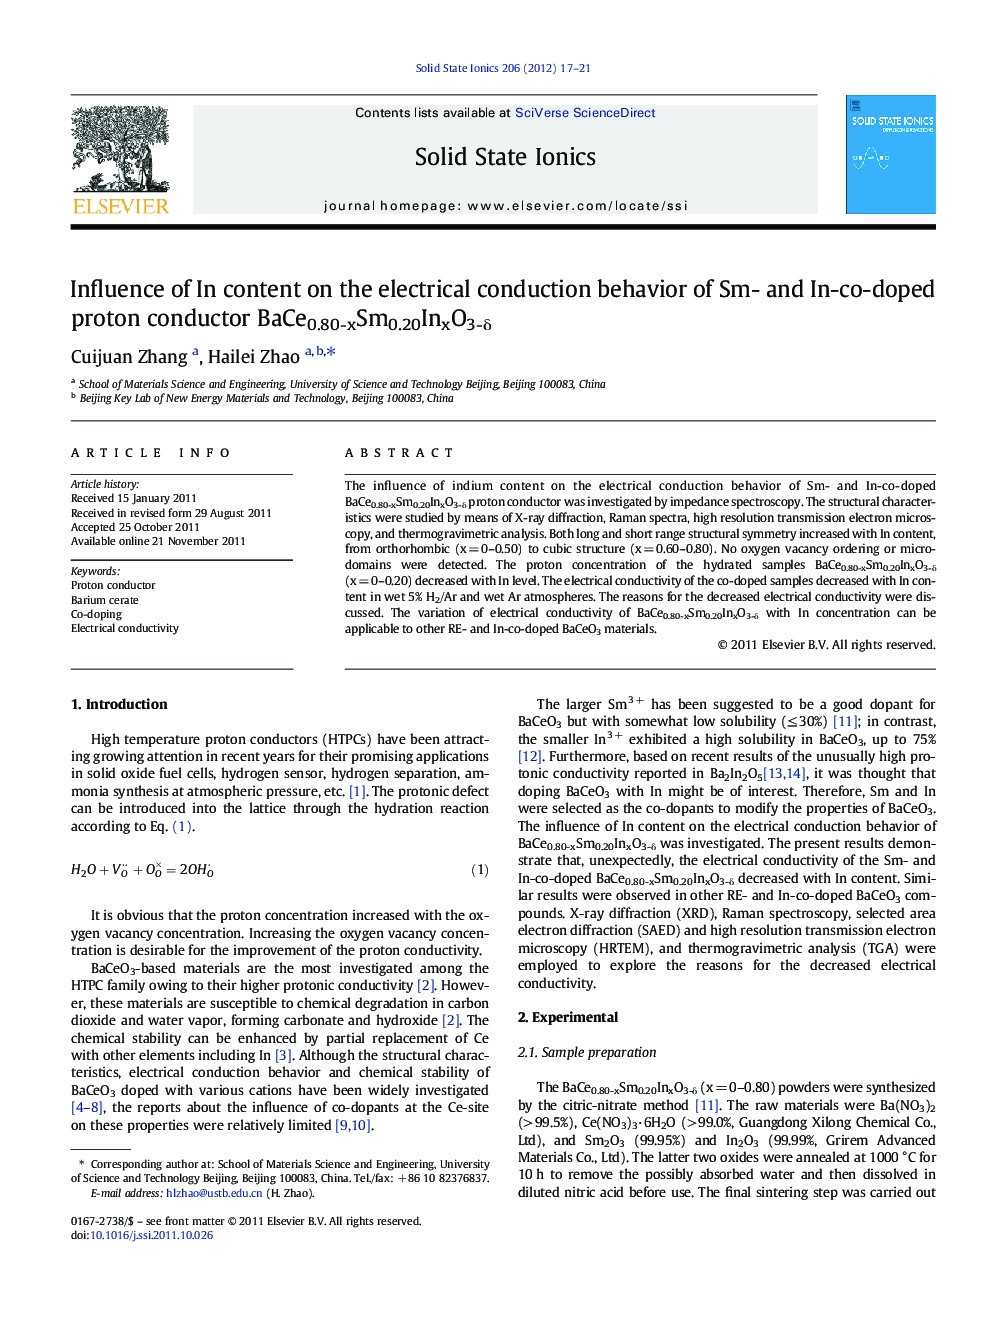 Influence of In content on the electrical conduction behavior of Sm- and In-co-doped proton conductor BaCe0.80-xSm0.20InxO3-δ